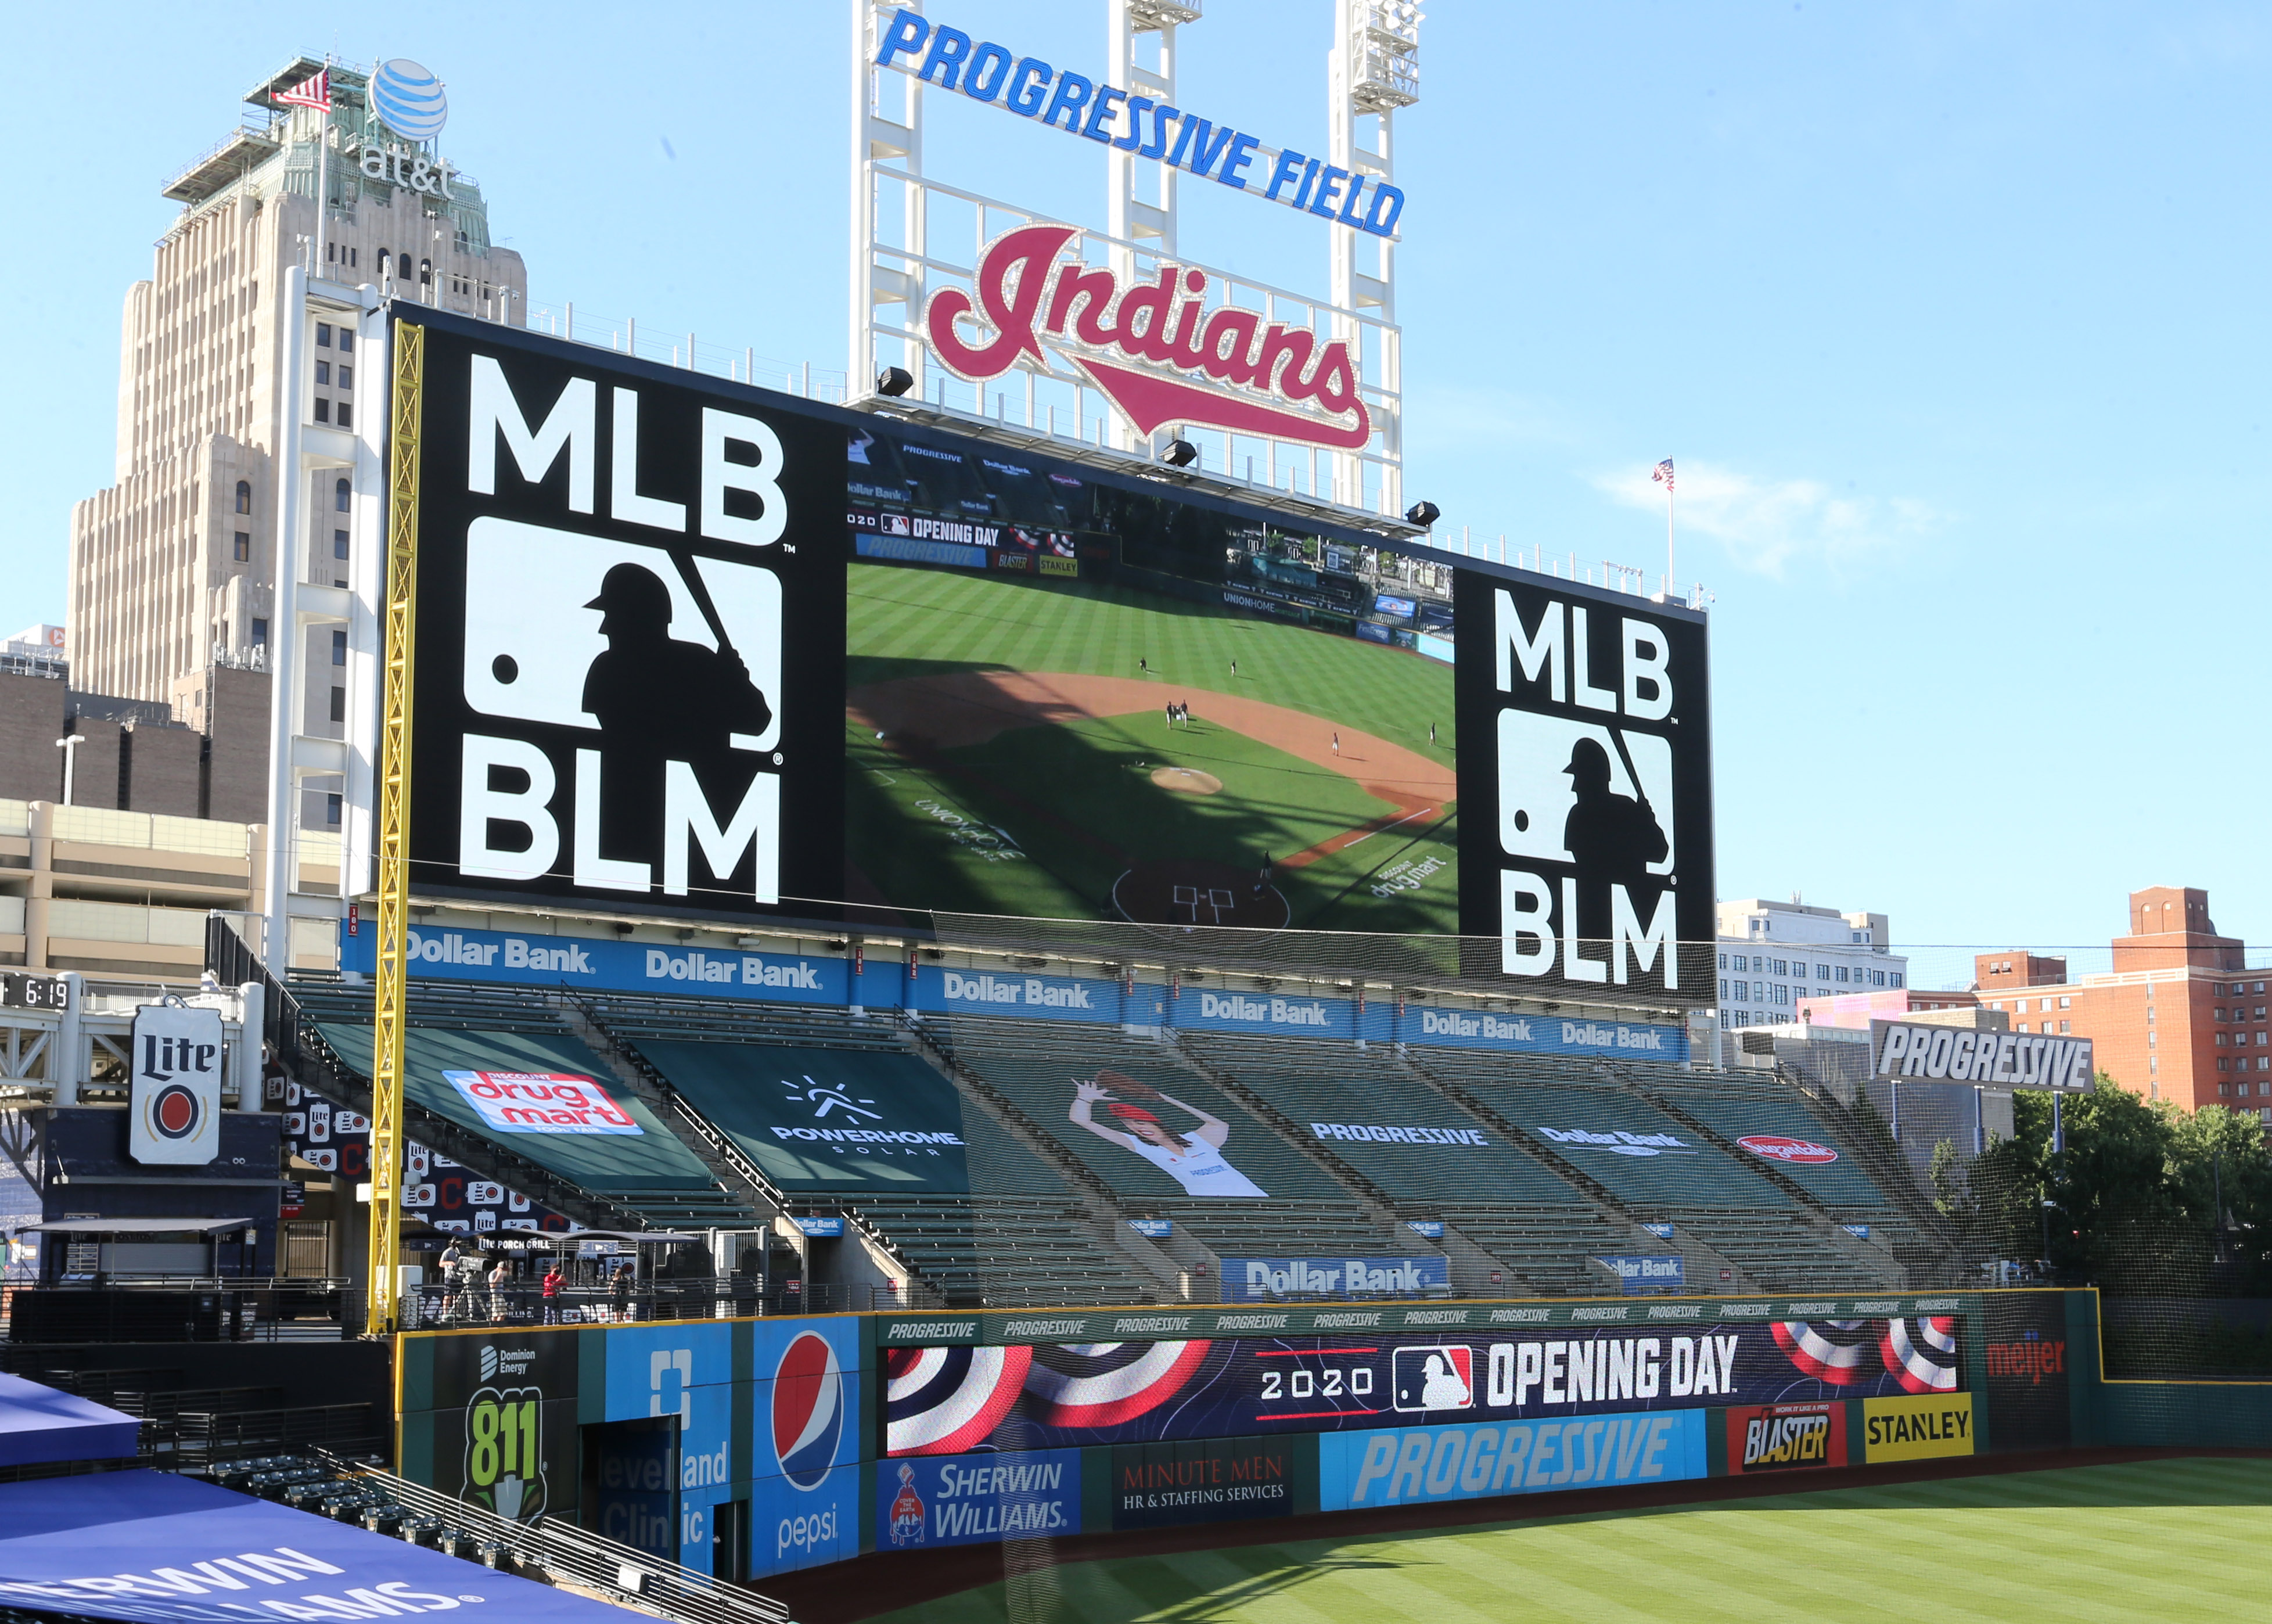 New York Times: Cleveland Indians plan to drop nickname